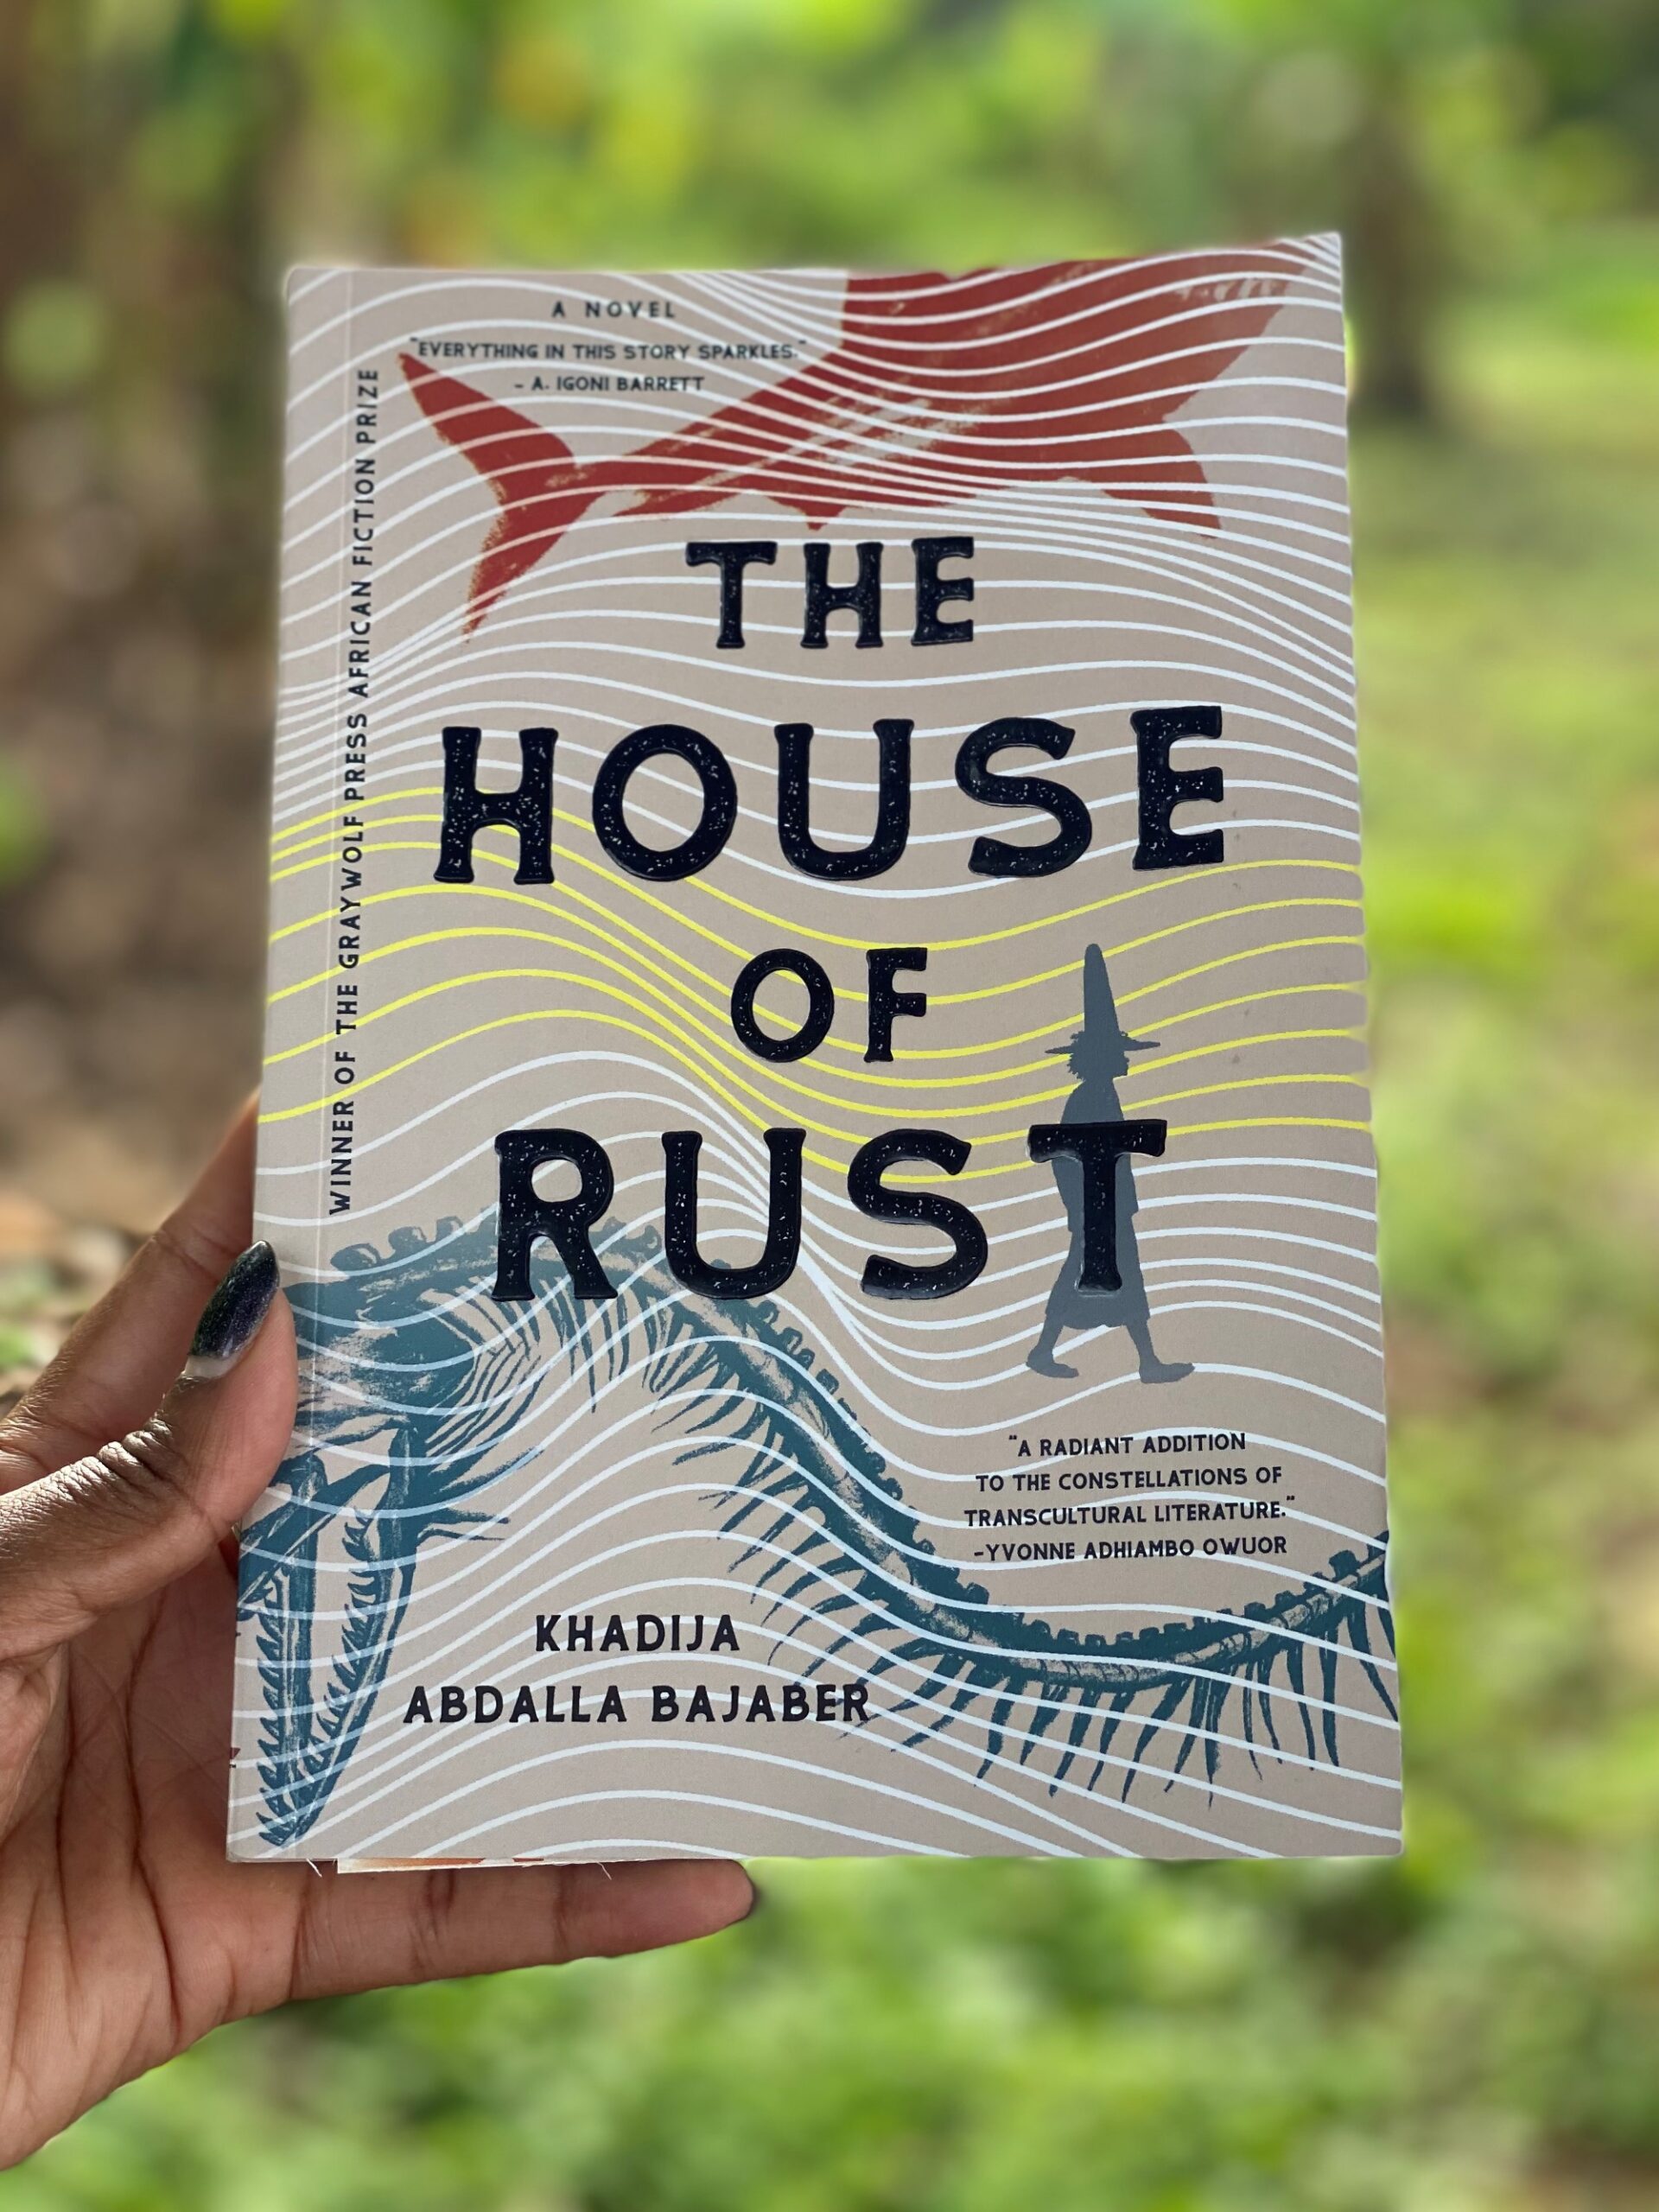 A Black lady's hand holding a copy of The House of Rust by Khadija Abdalla Bajaber